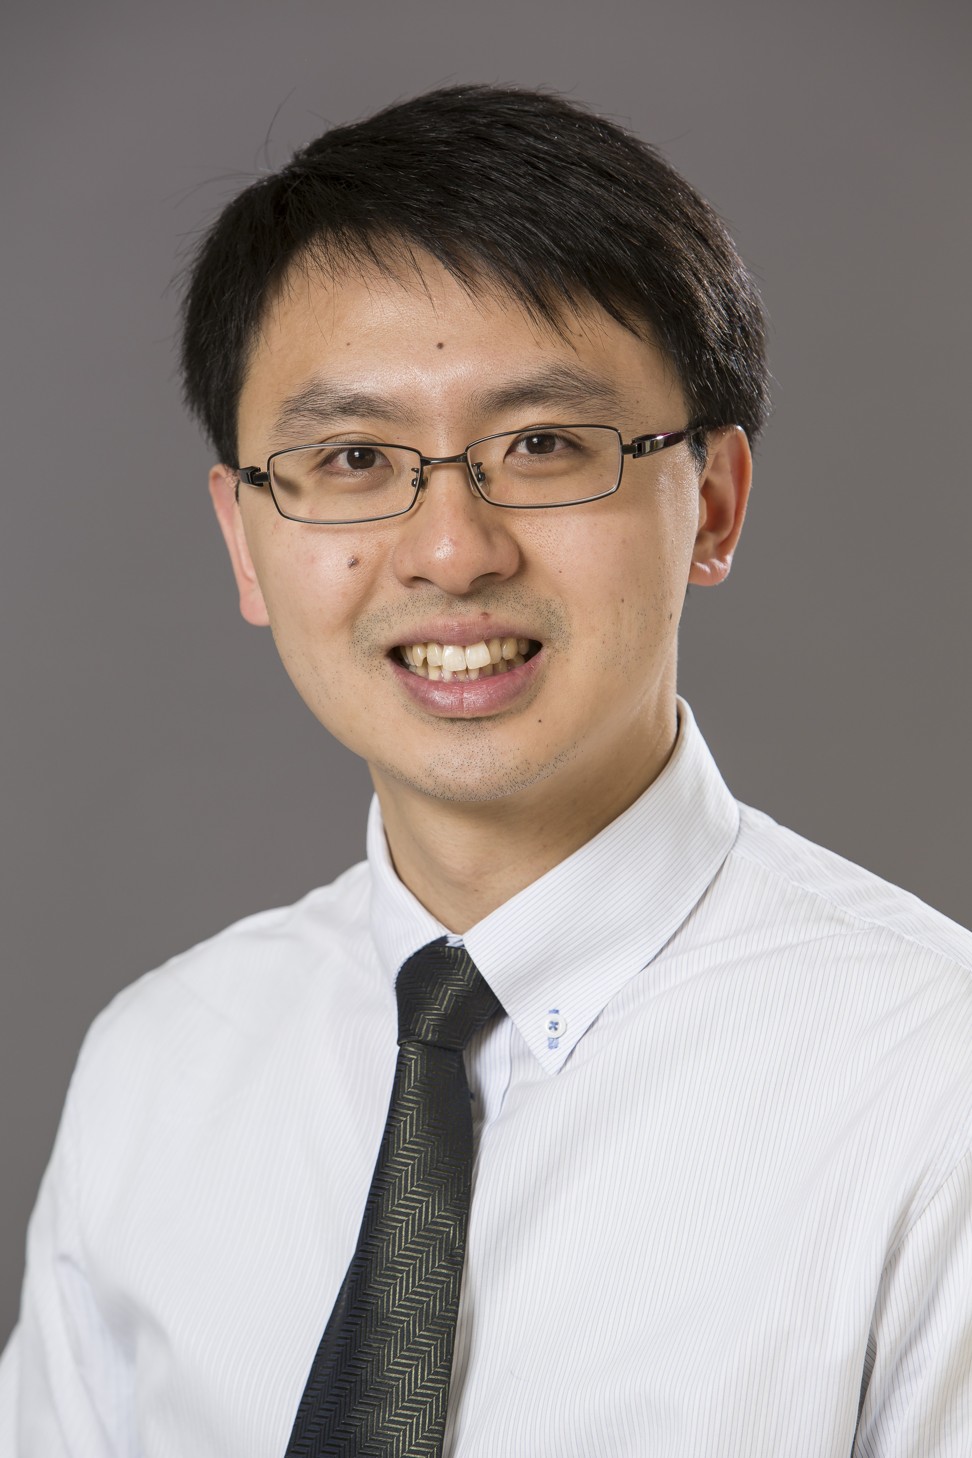 Dr Sunny Wong is clinical assistant professor at the Institute of Digestive Disease at the Chinese University of Hong Kong.